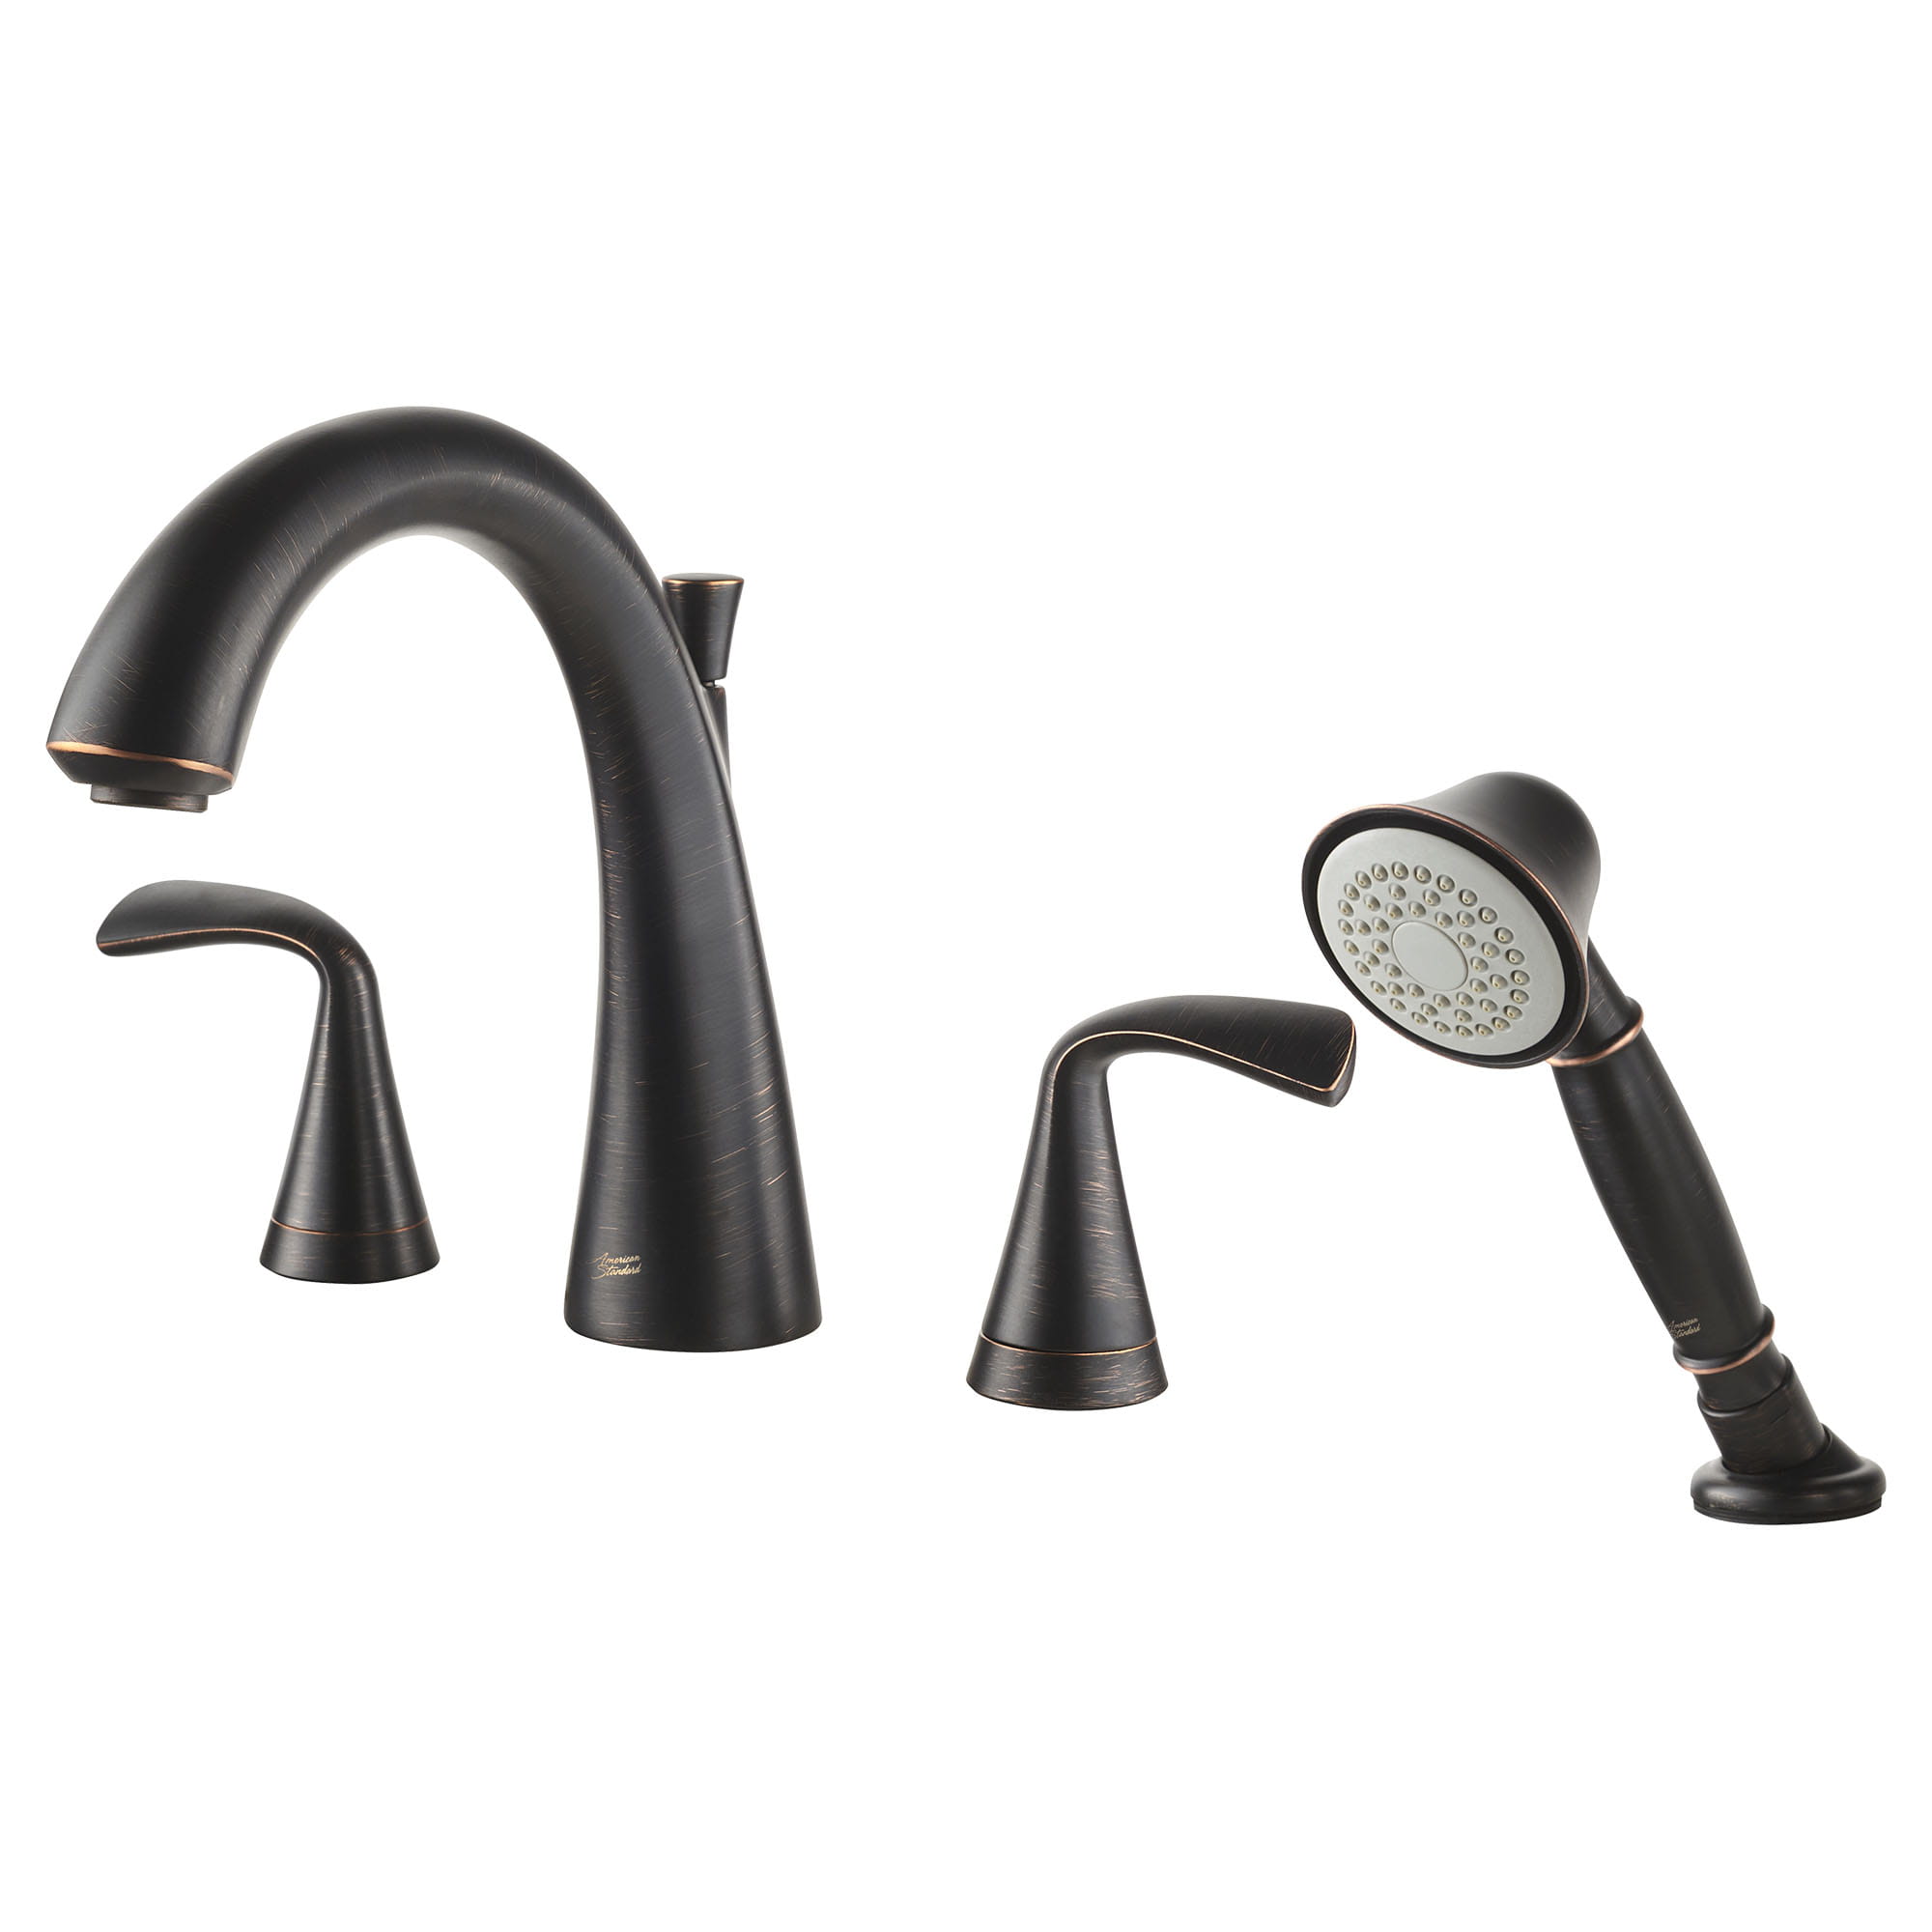 Fluent Bathtub Faucet With  Lever Handles and Personal Shower for Flash Rough In Valve LEGACY BRONZE